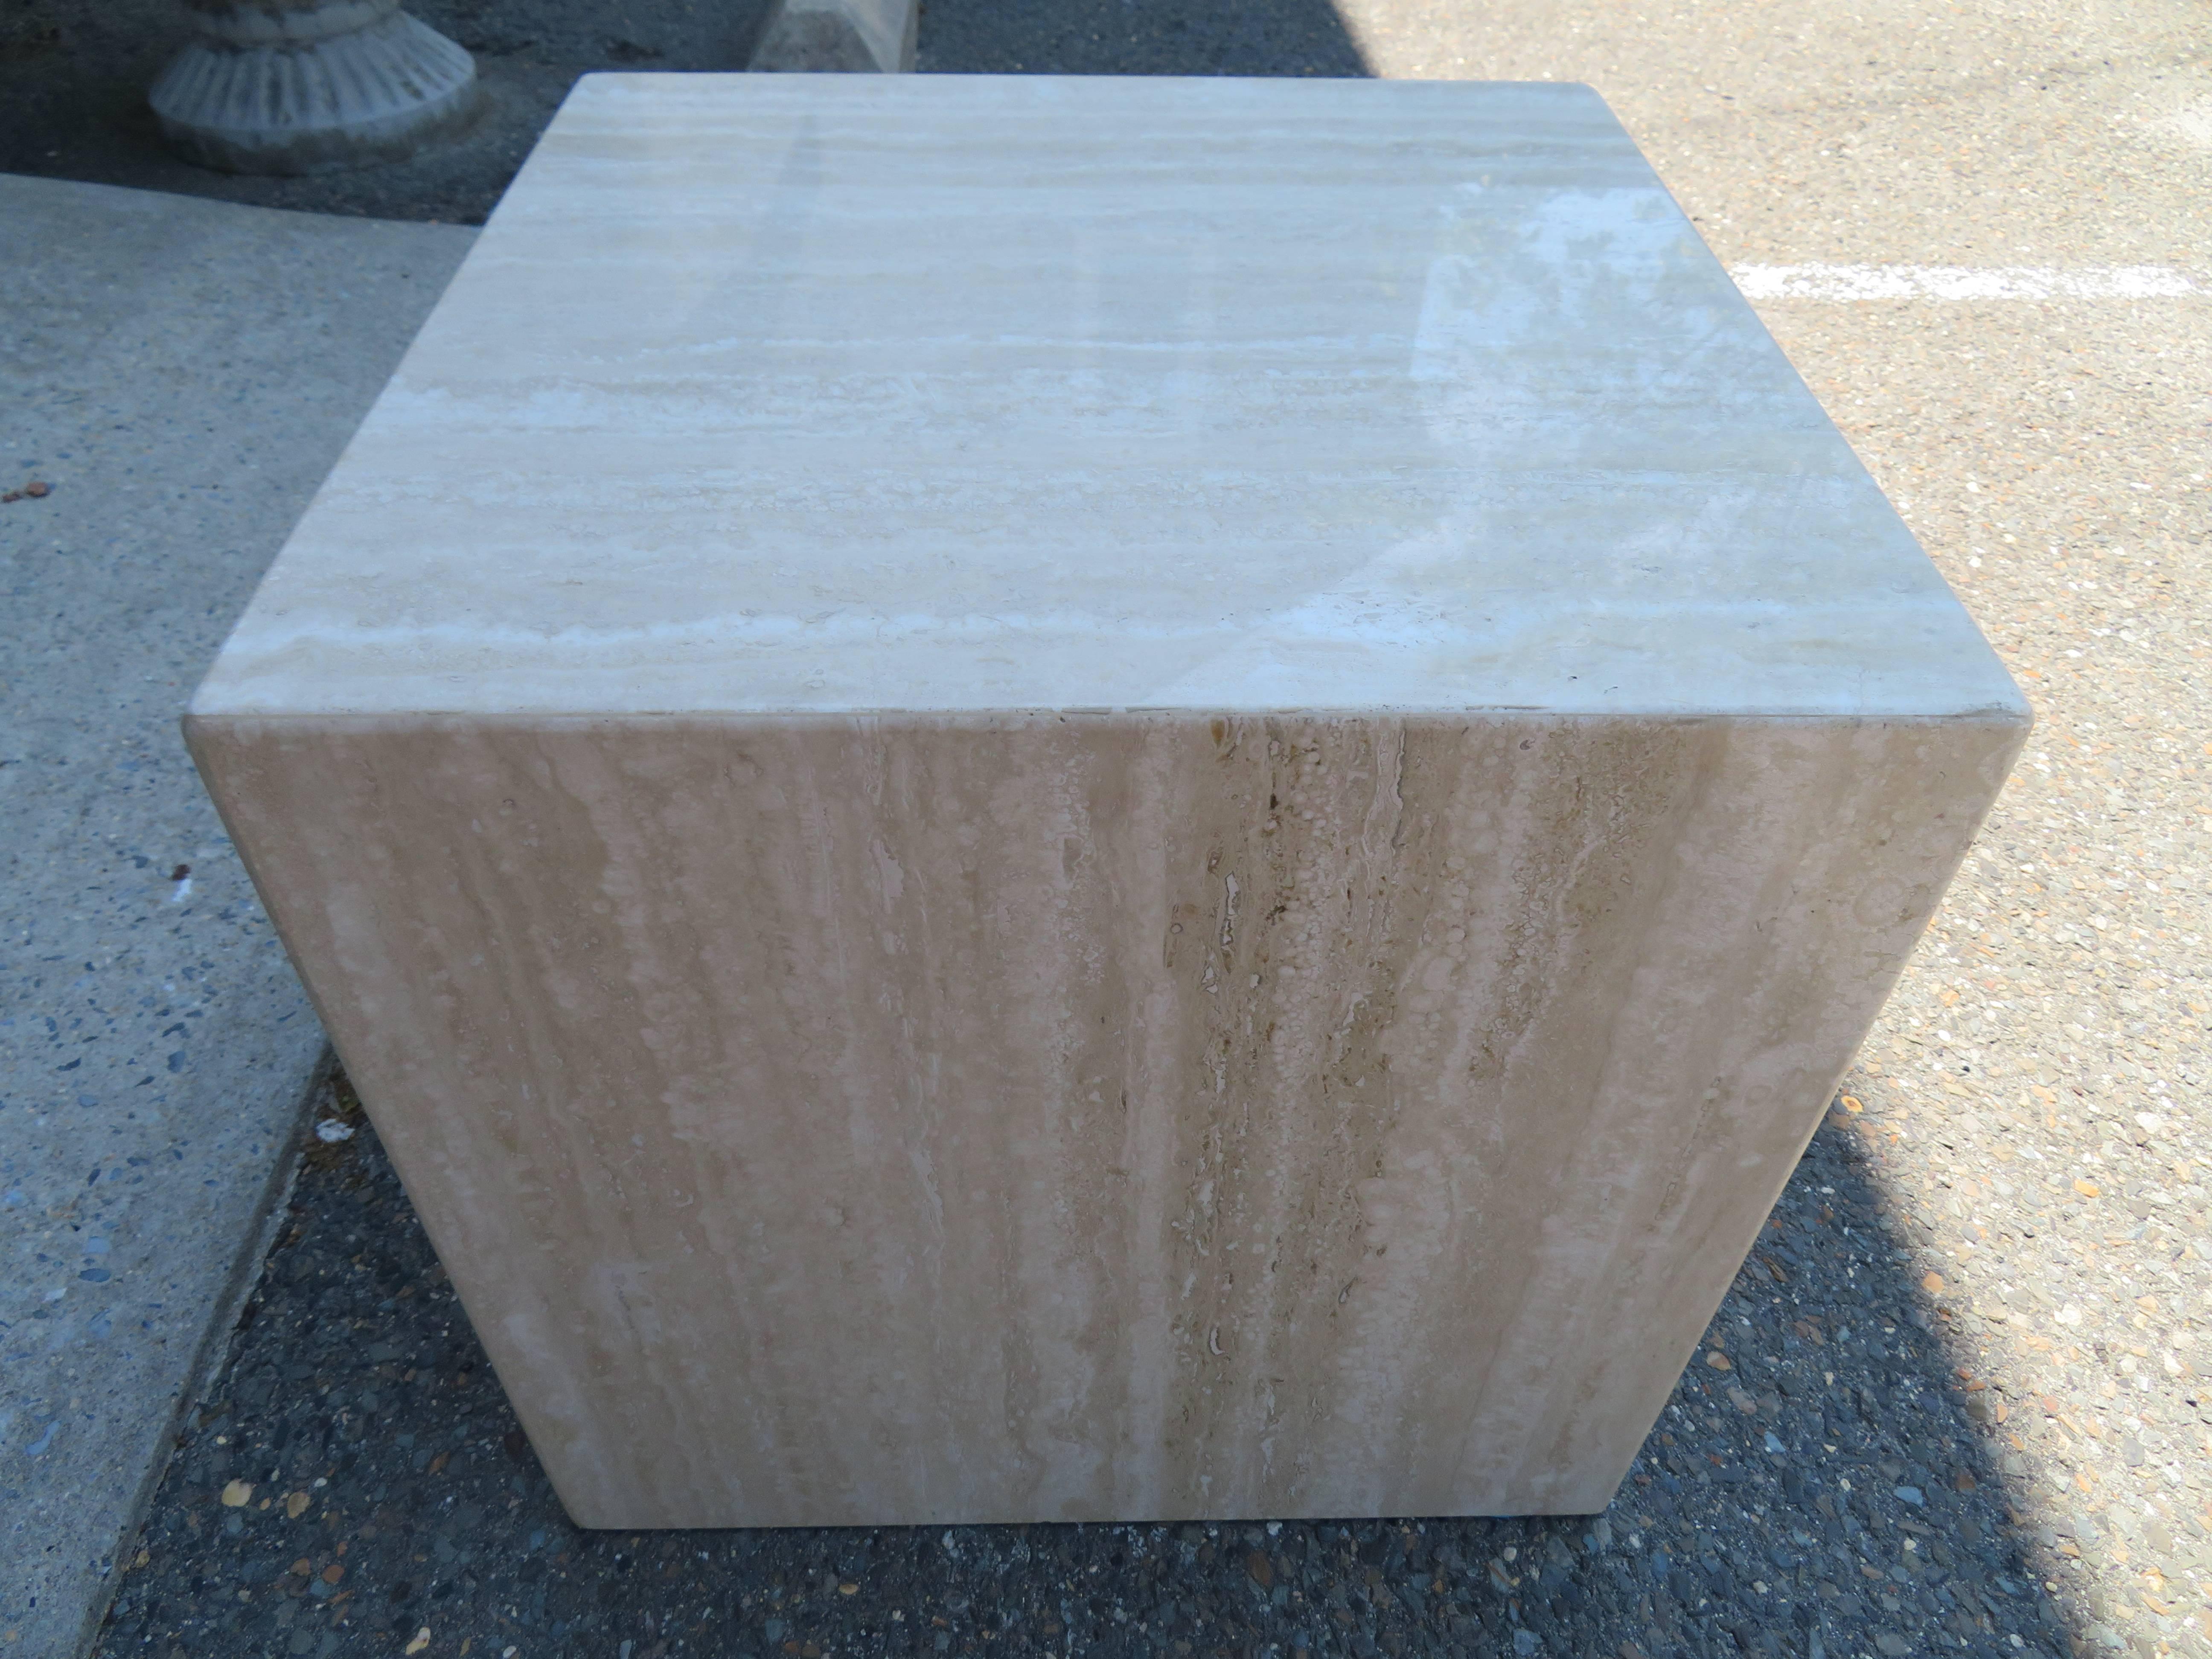 Gorgeous 1970s modern travertine cube side table or large pedestal. This piece would be a fabulous Minimalist modern side table or use to display a large sculpture-you decide!